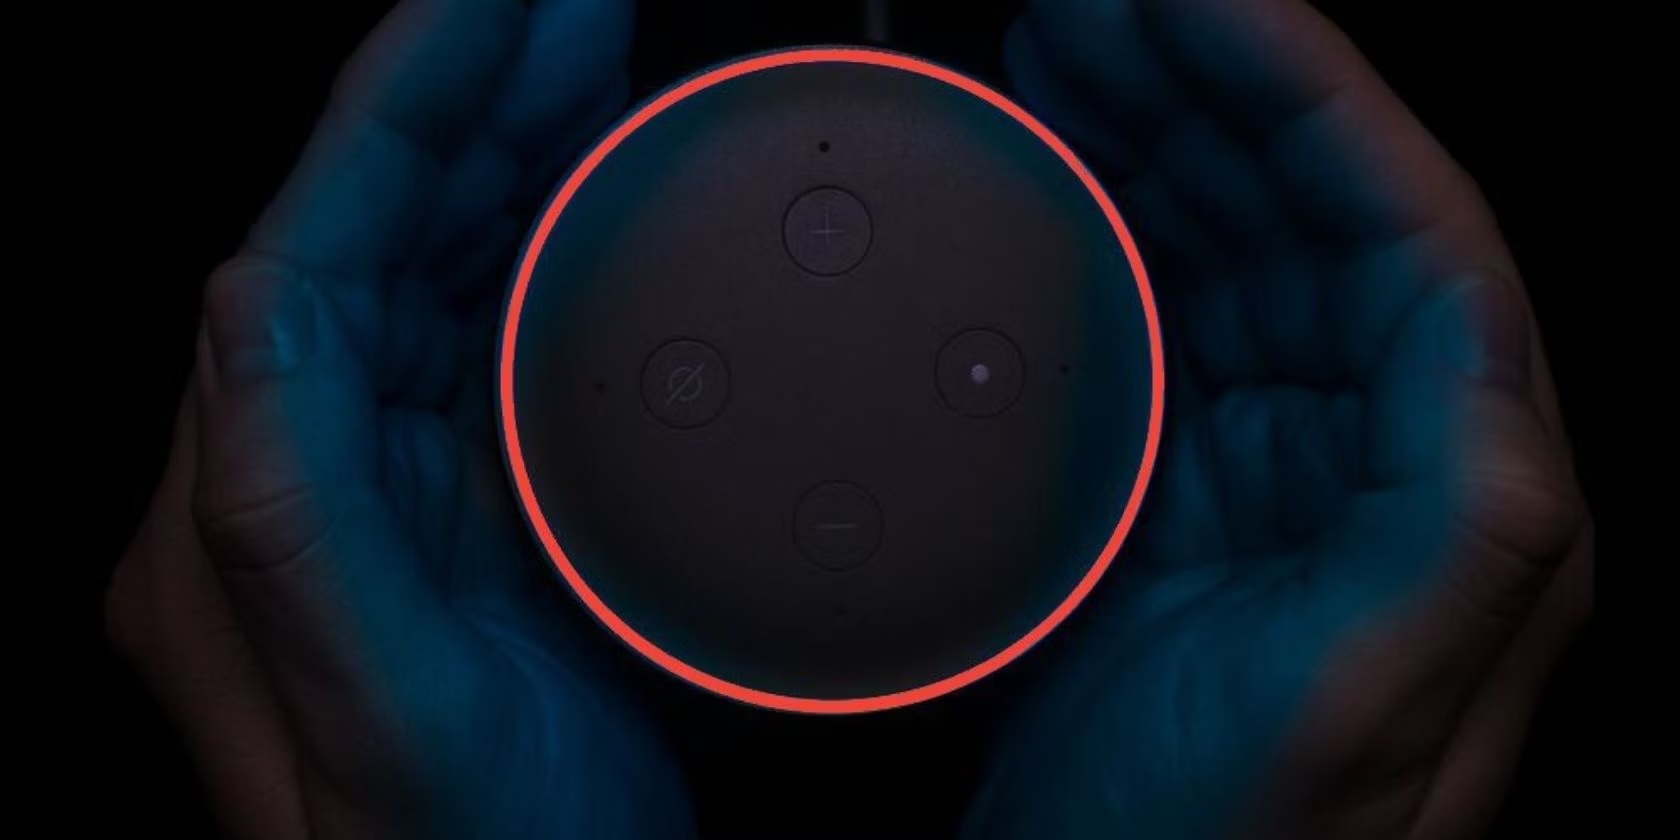 Why Does Alexa Have A Red Ring